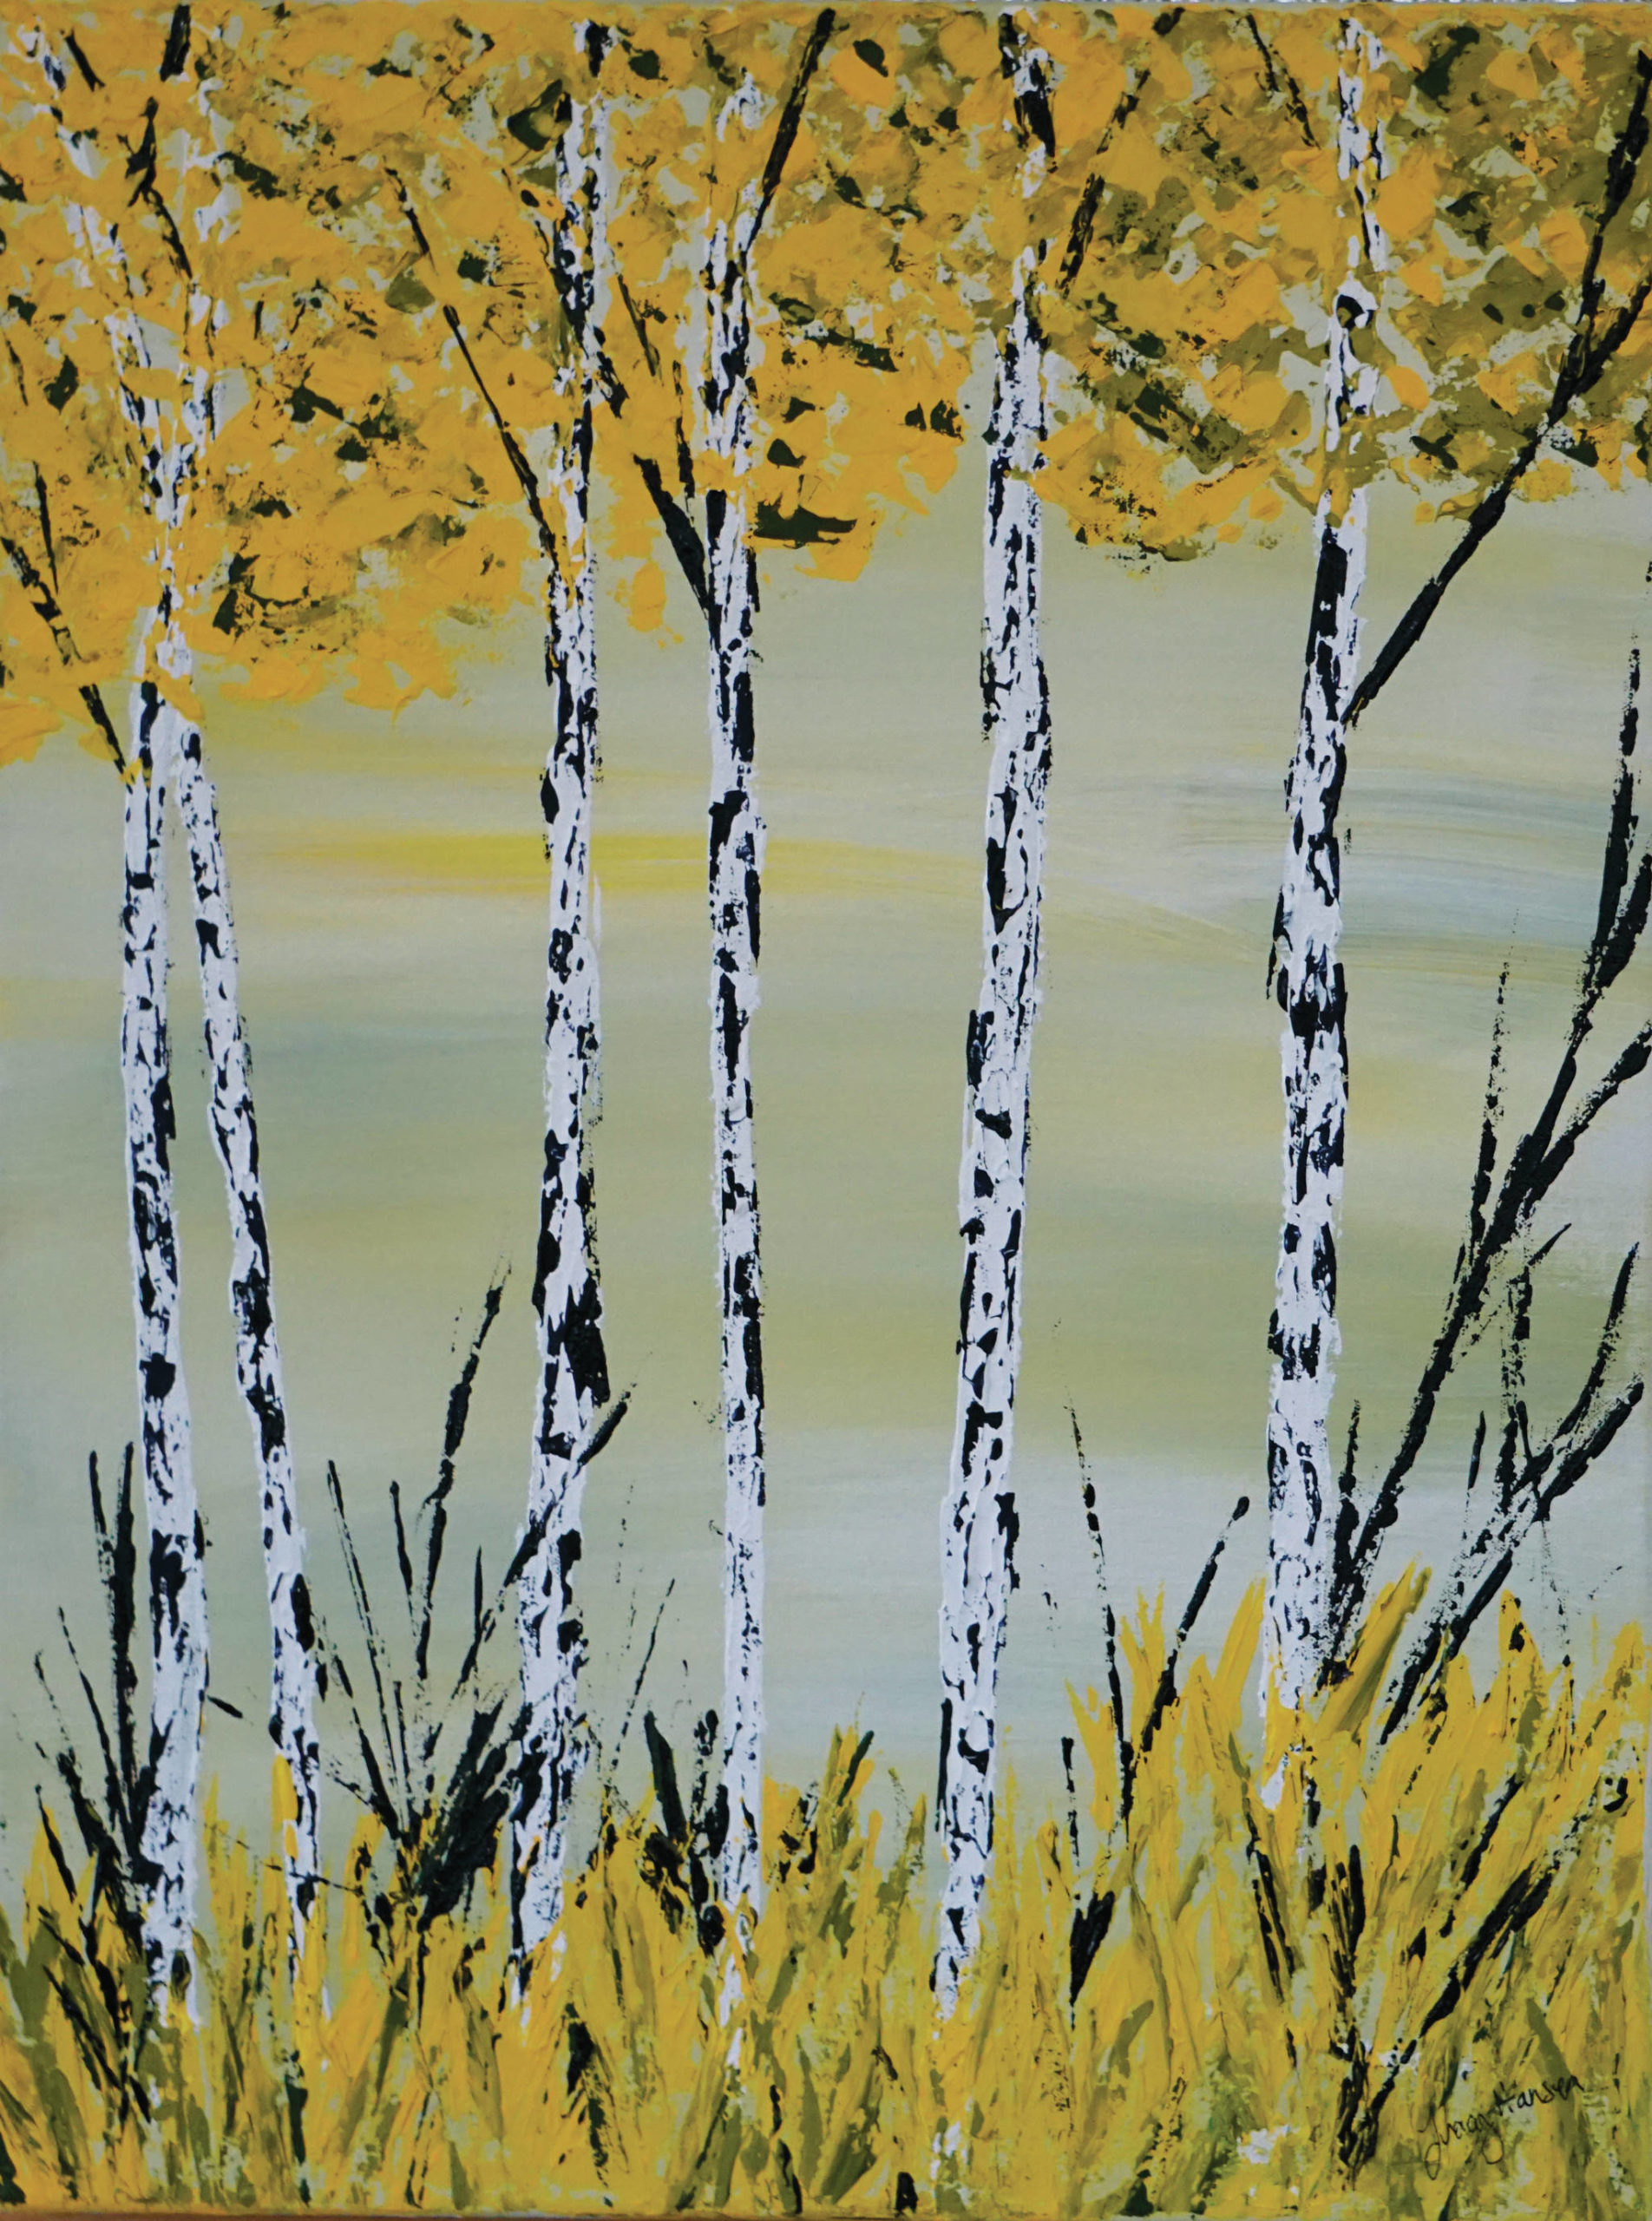 Tracy Hansen’s painting, “Yellow Birch,” is part of her exhibit showing at Grace Ridge Brewing in Homer, Alaska. (Photo by Michael Armstrong/Homer News)